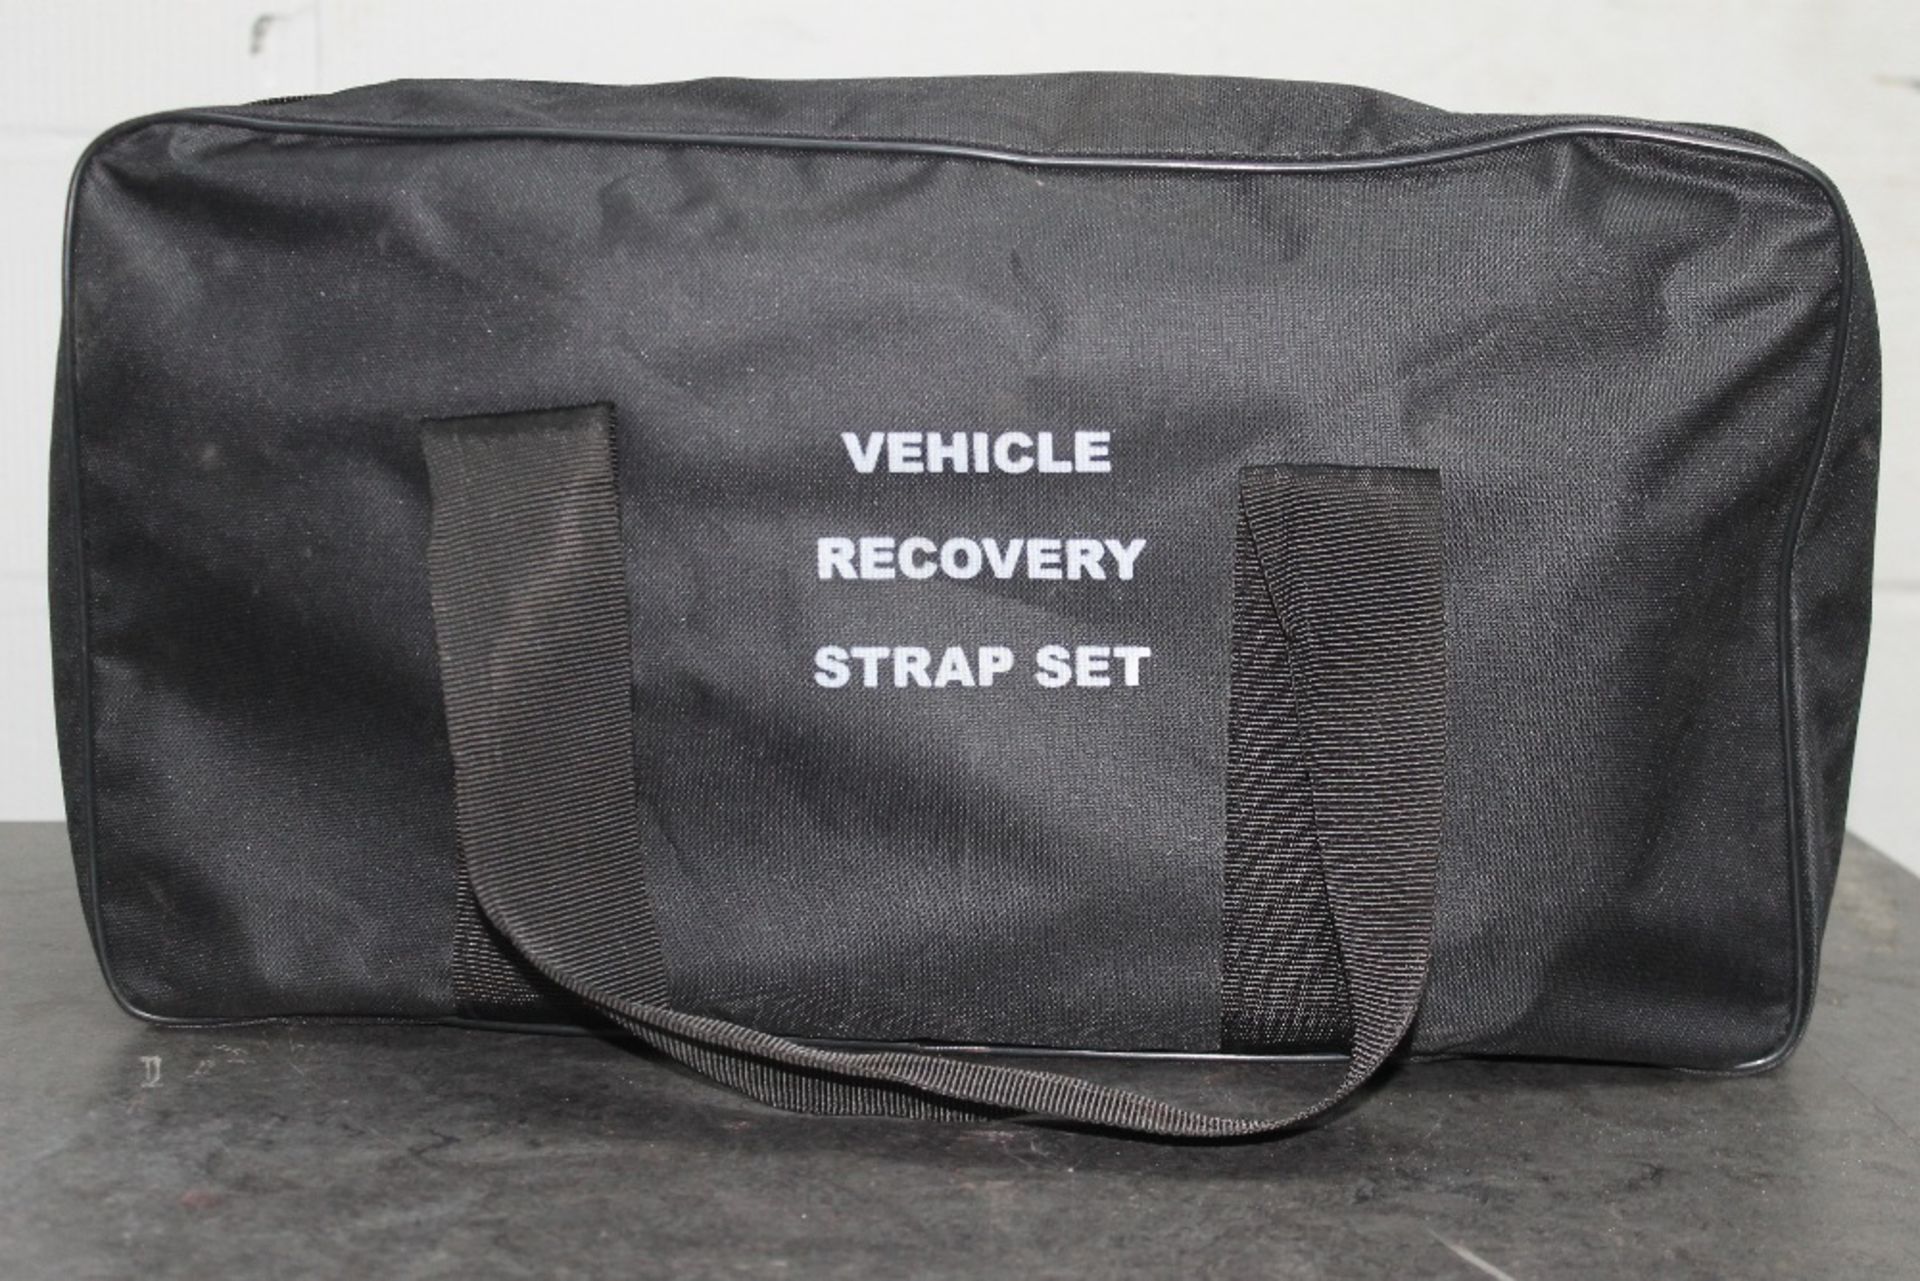 Vehicle Recovery Strap Set